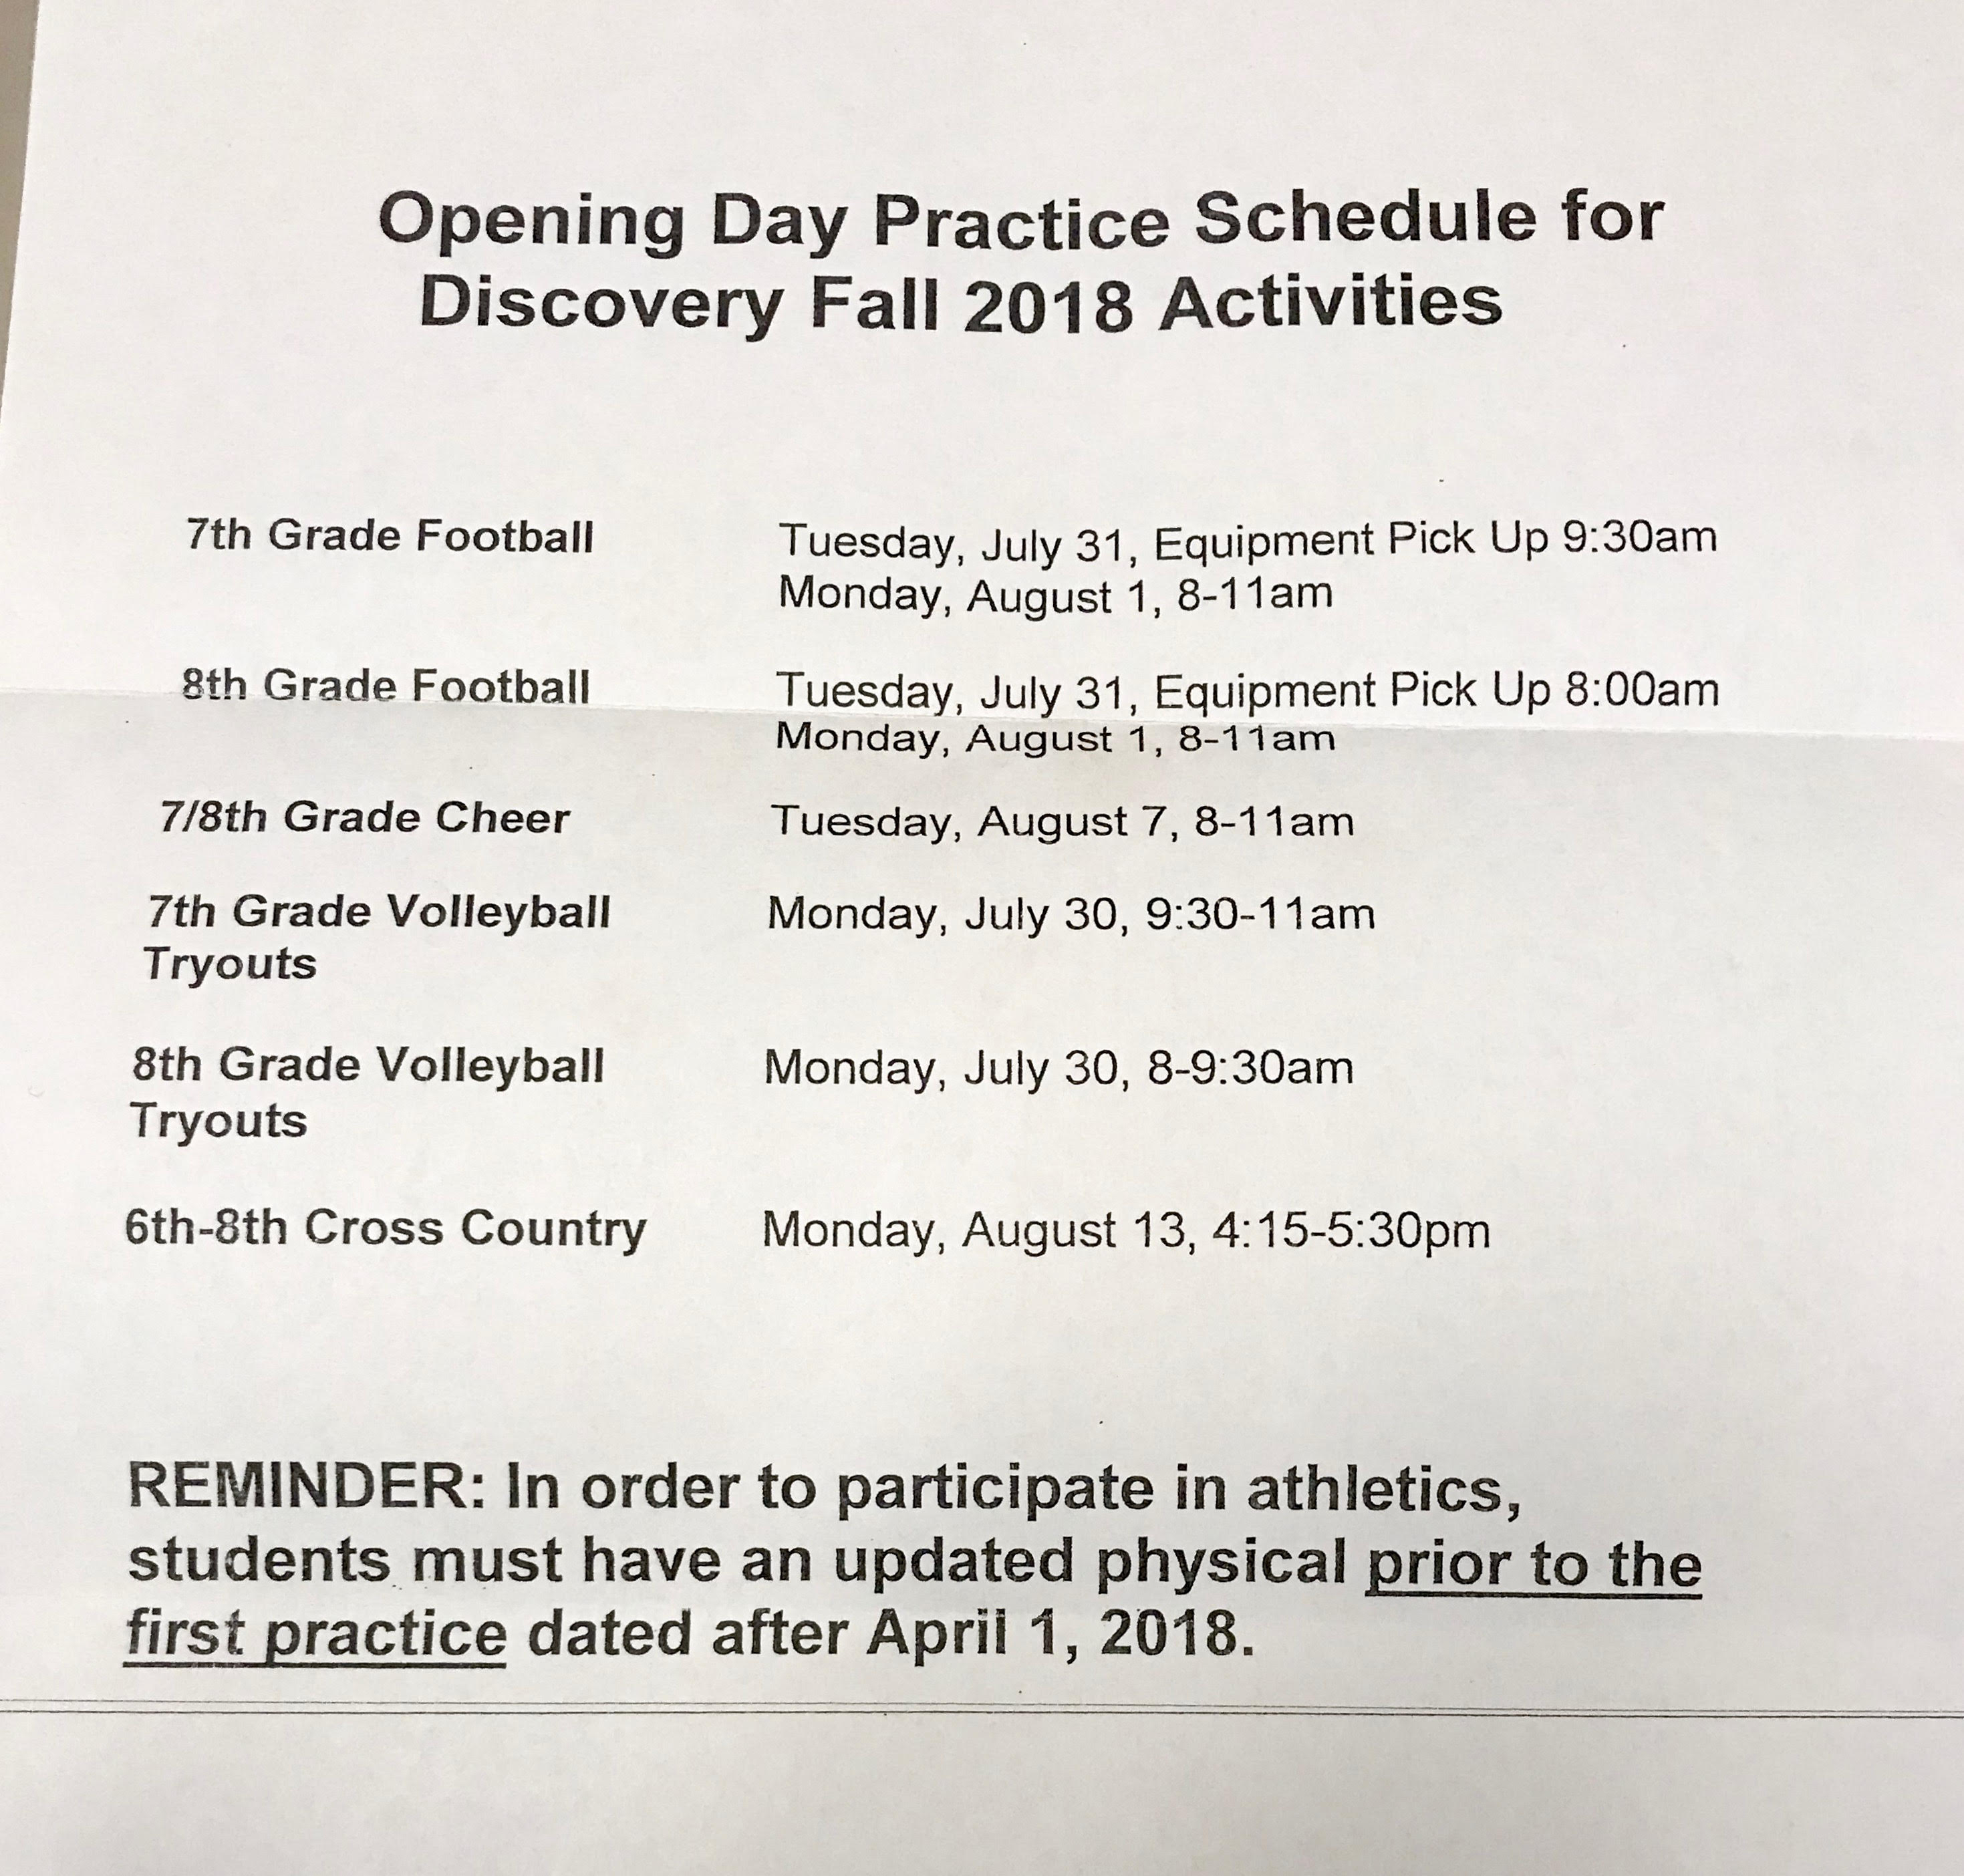 Opening Day Practice Schedule for DMS Fall 2018